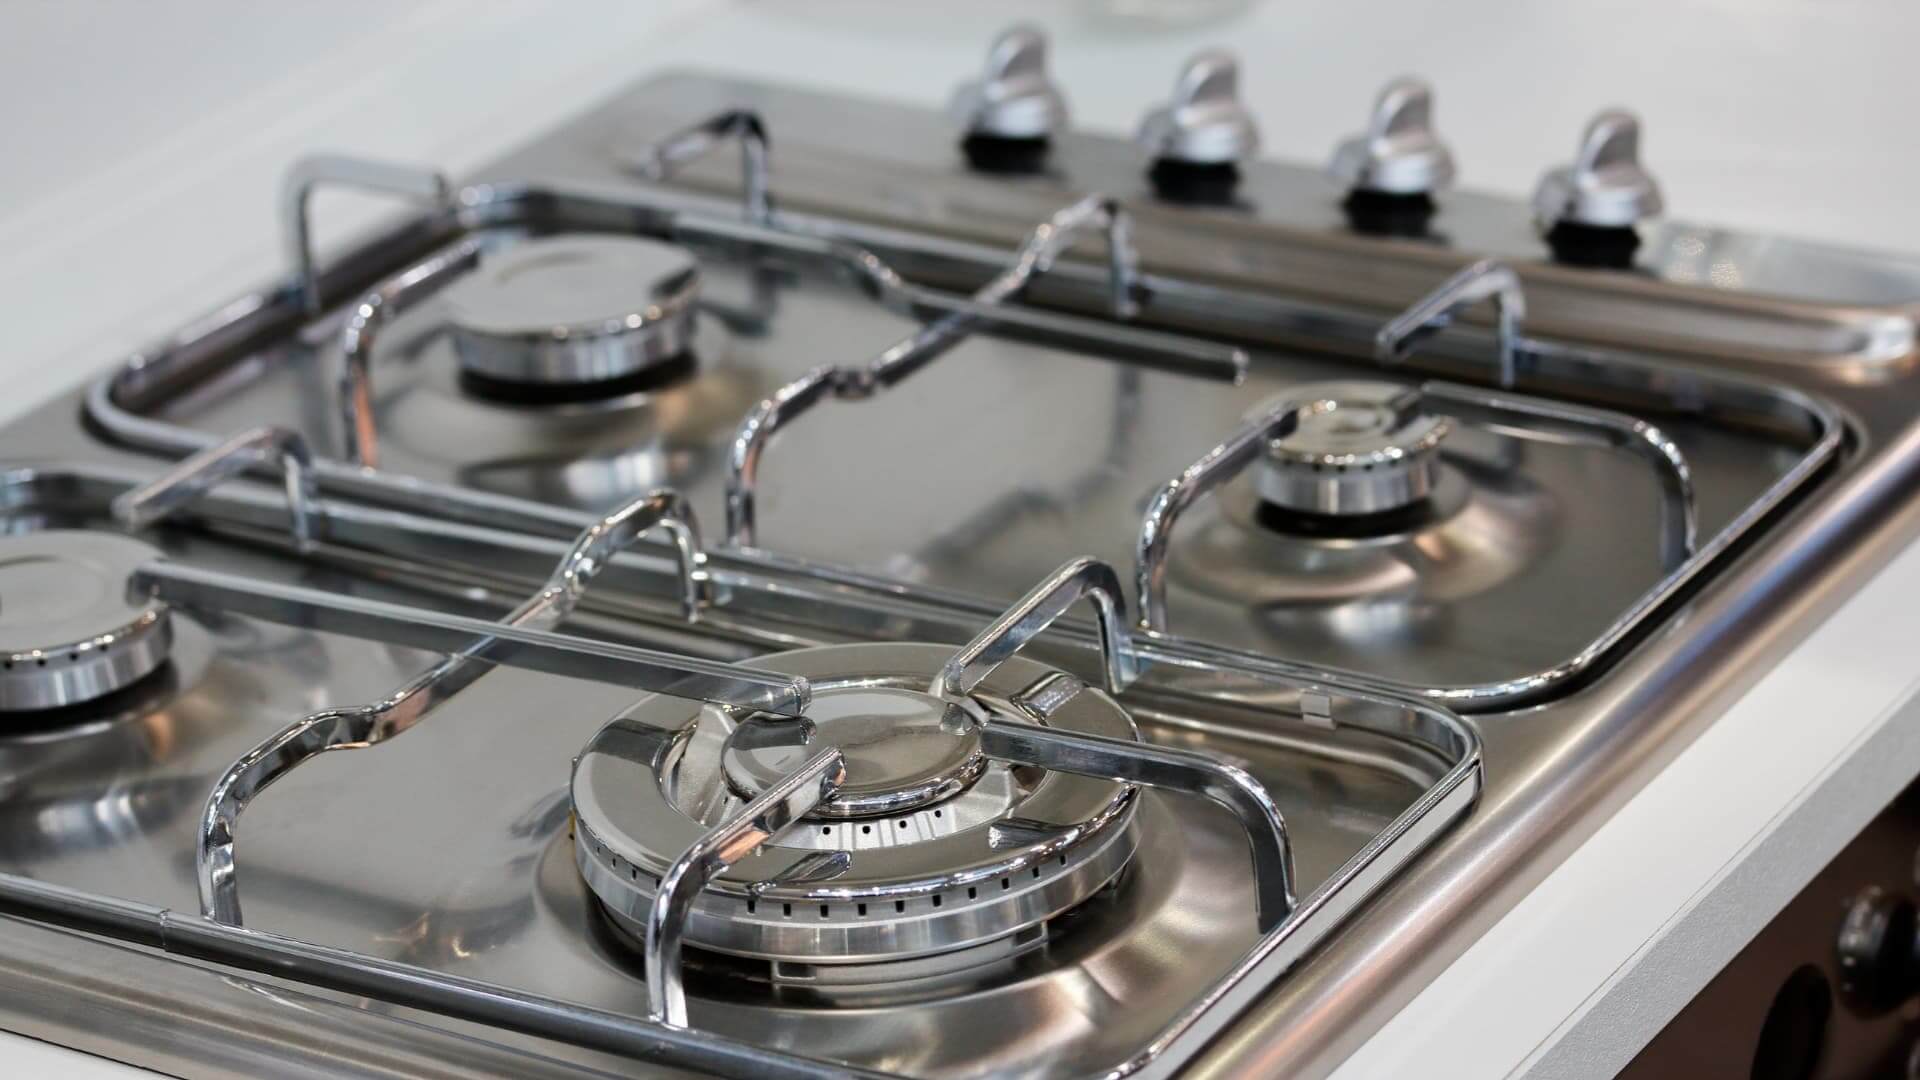 stainless steel cooktop